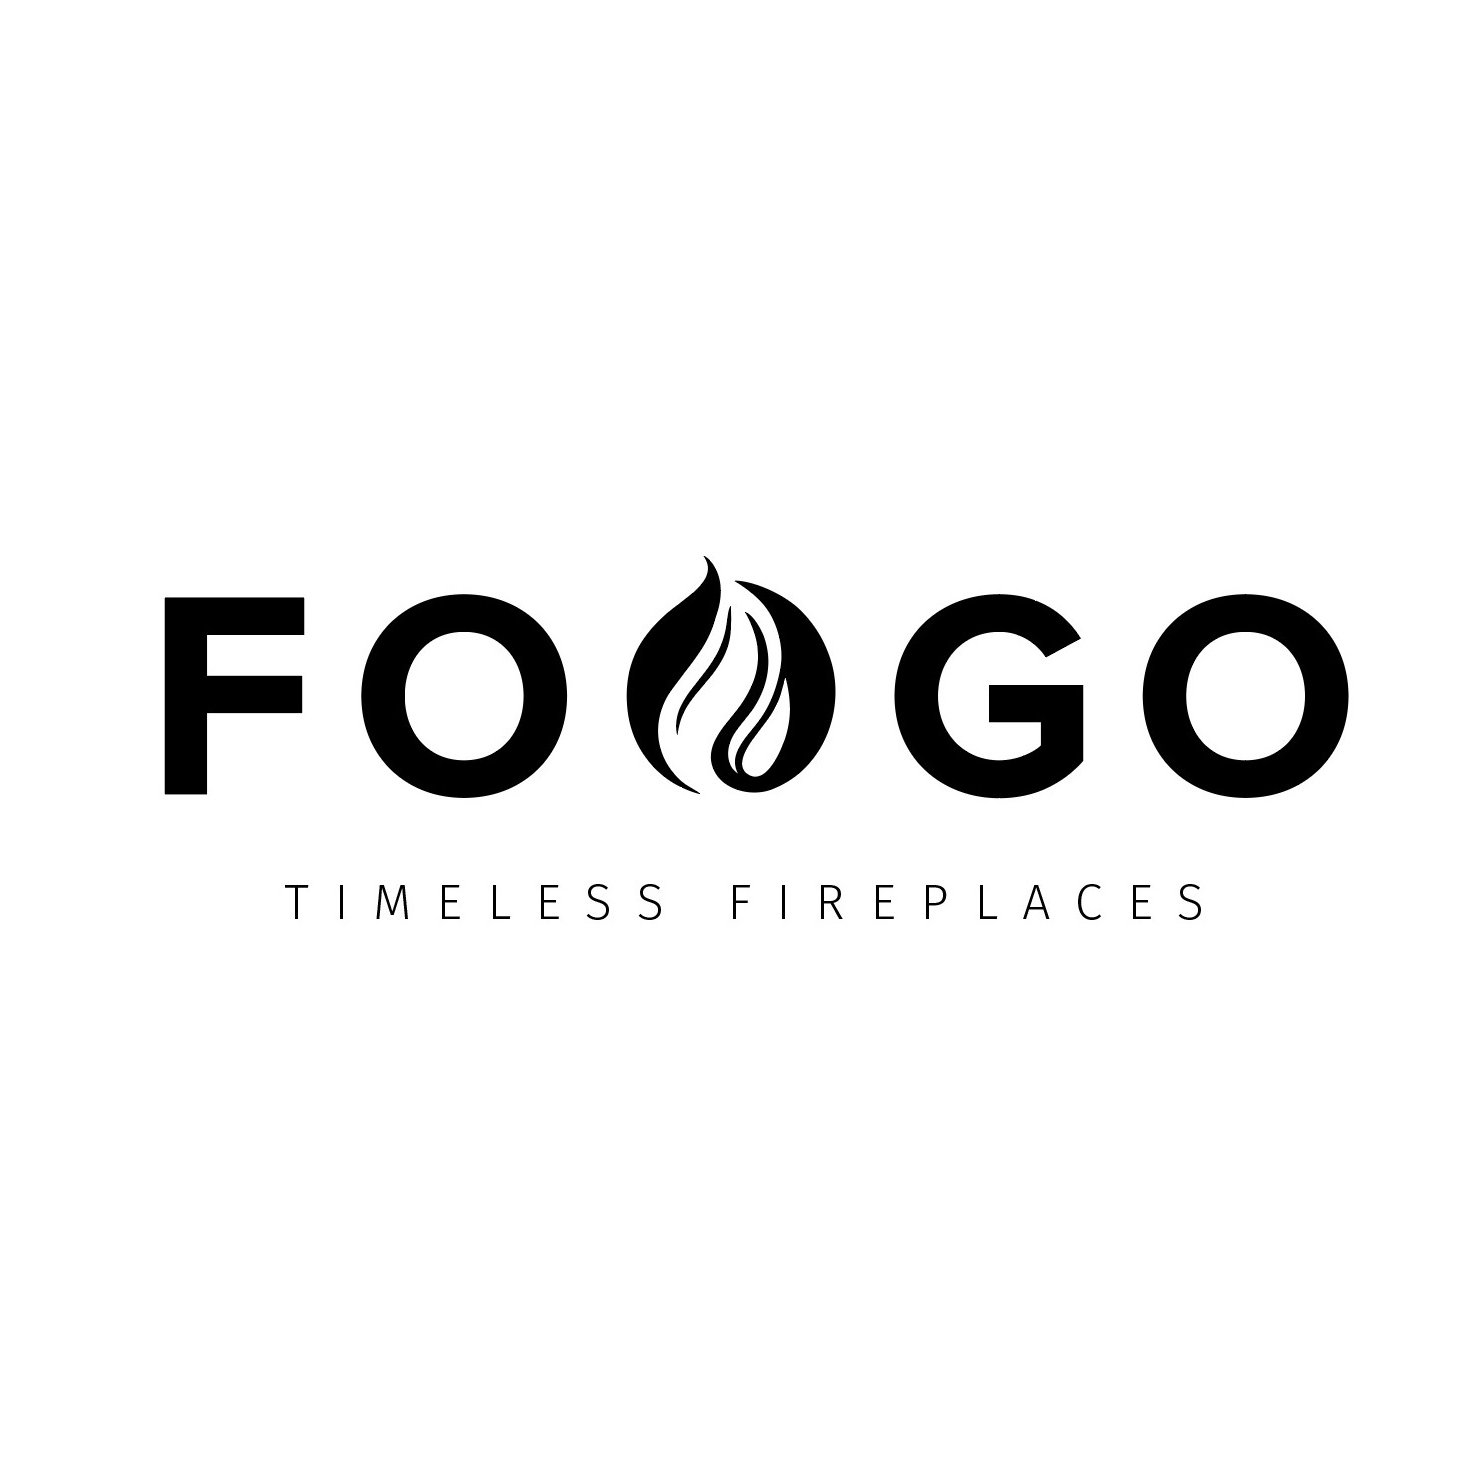 FOOGO is a design brand of timeless fireplaces that bring warmth and cosiness to every indoor and outdoor space. Exquisite firestyles 🔥